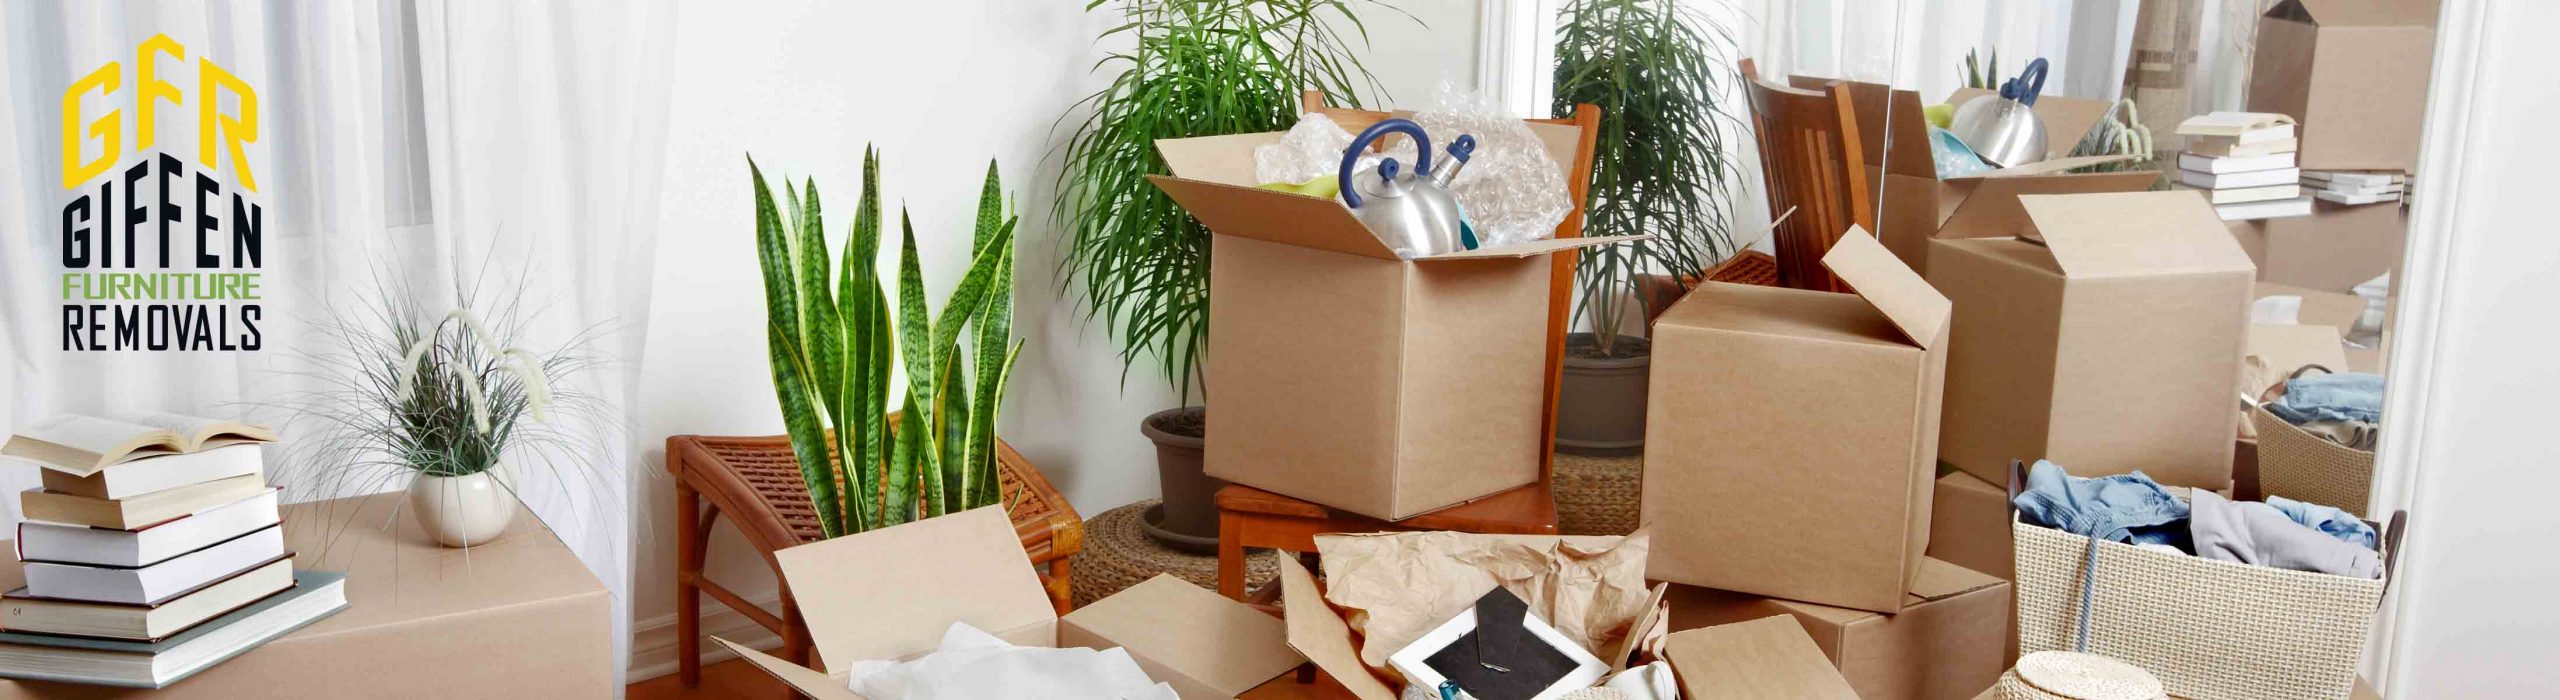 Giffen Furniture Removals How To Pack An Entire House In Just One Day